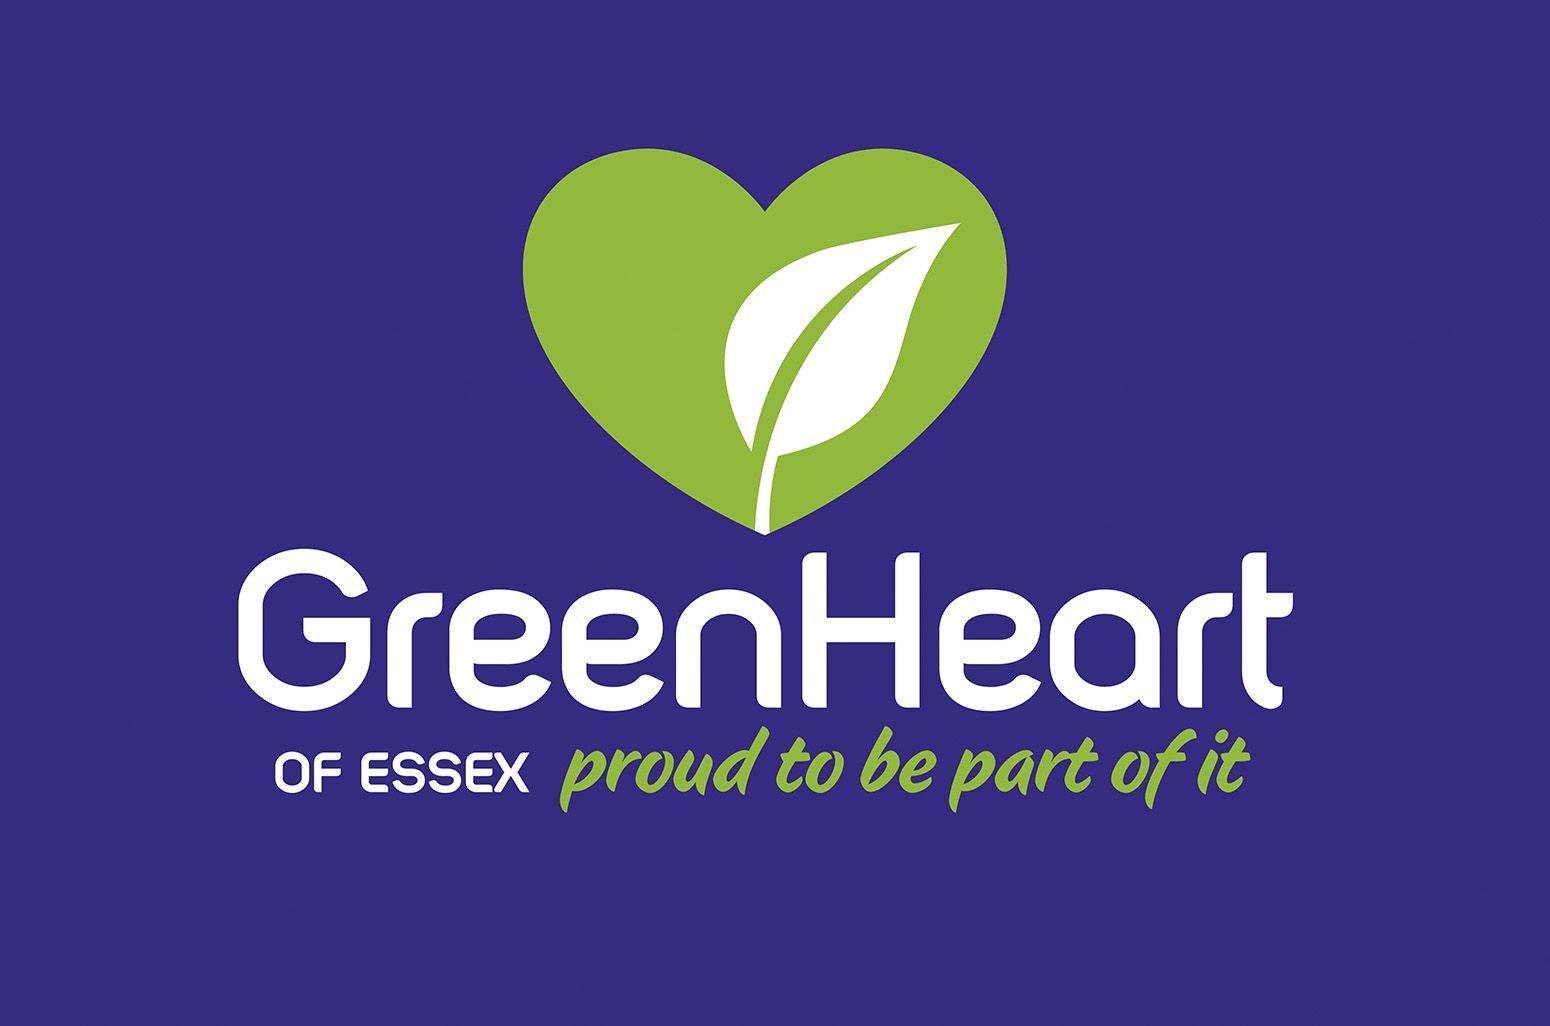 Blue and Green Heart Logo - The Green Heart of Essex - Braintree Council - Indelible Creative